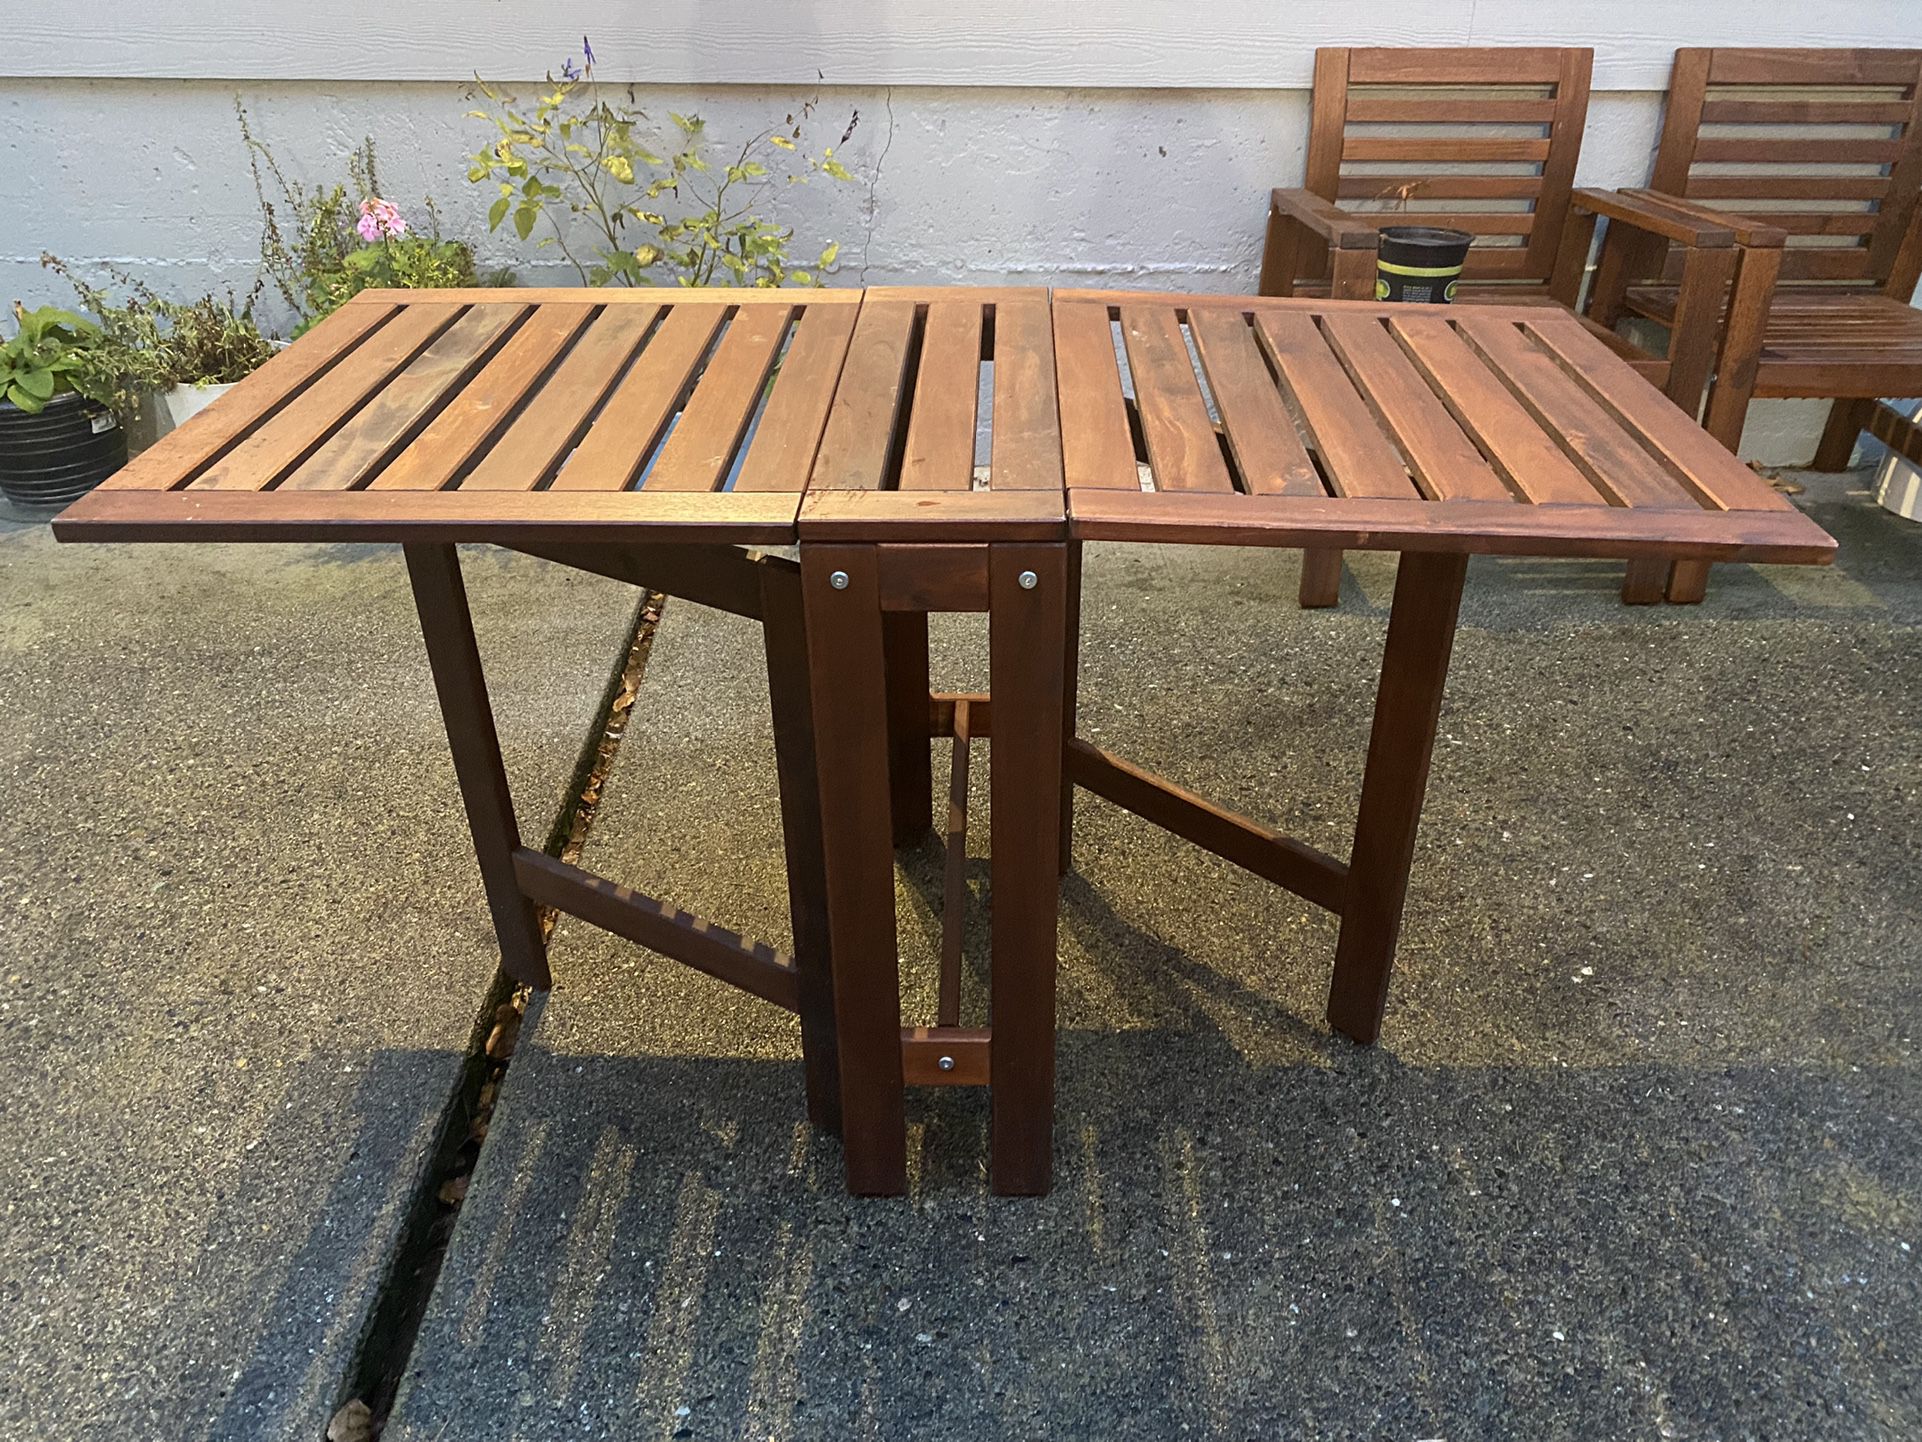 IKEA Patio Table with 2 chairs